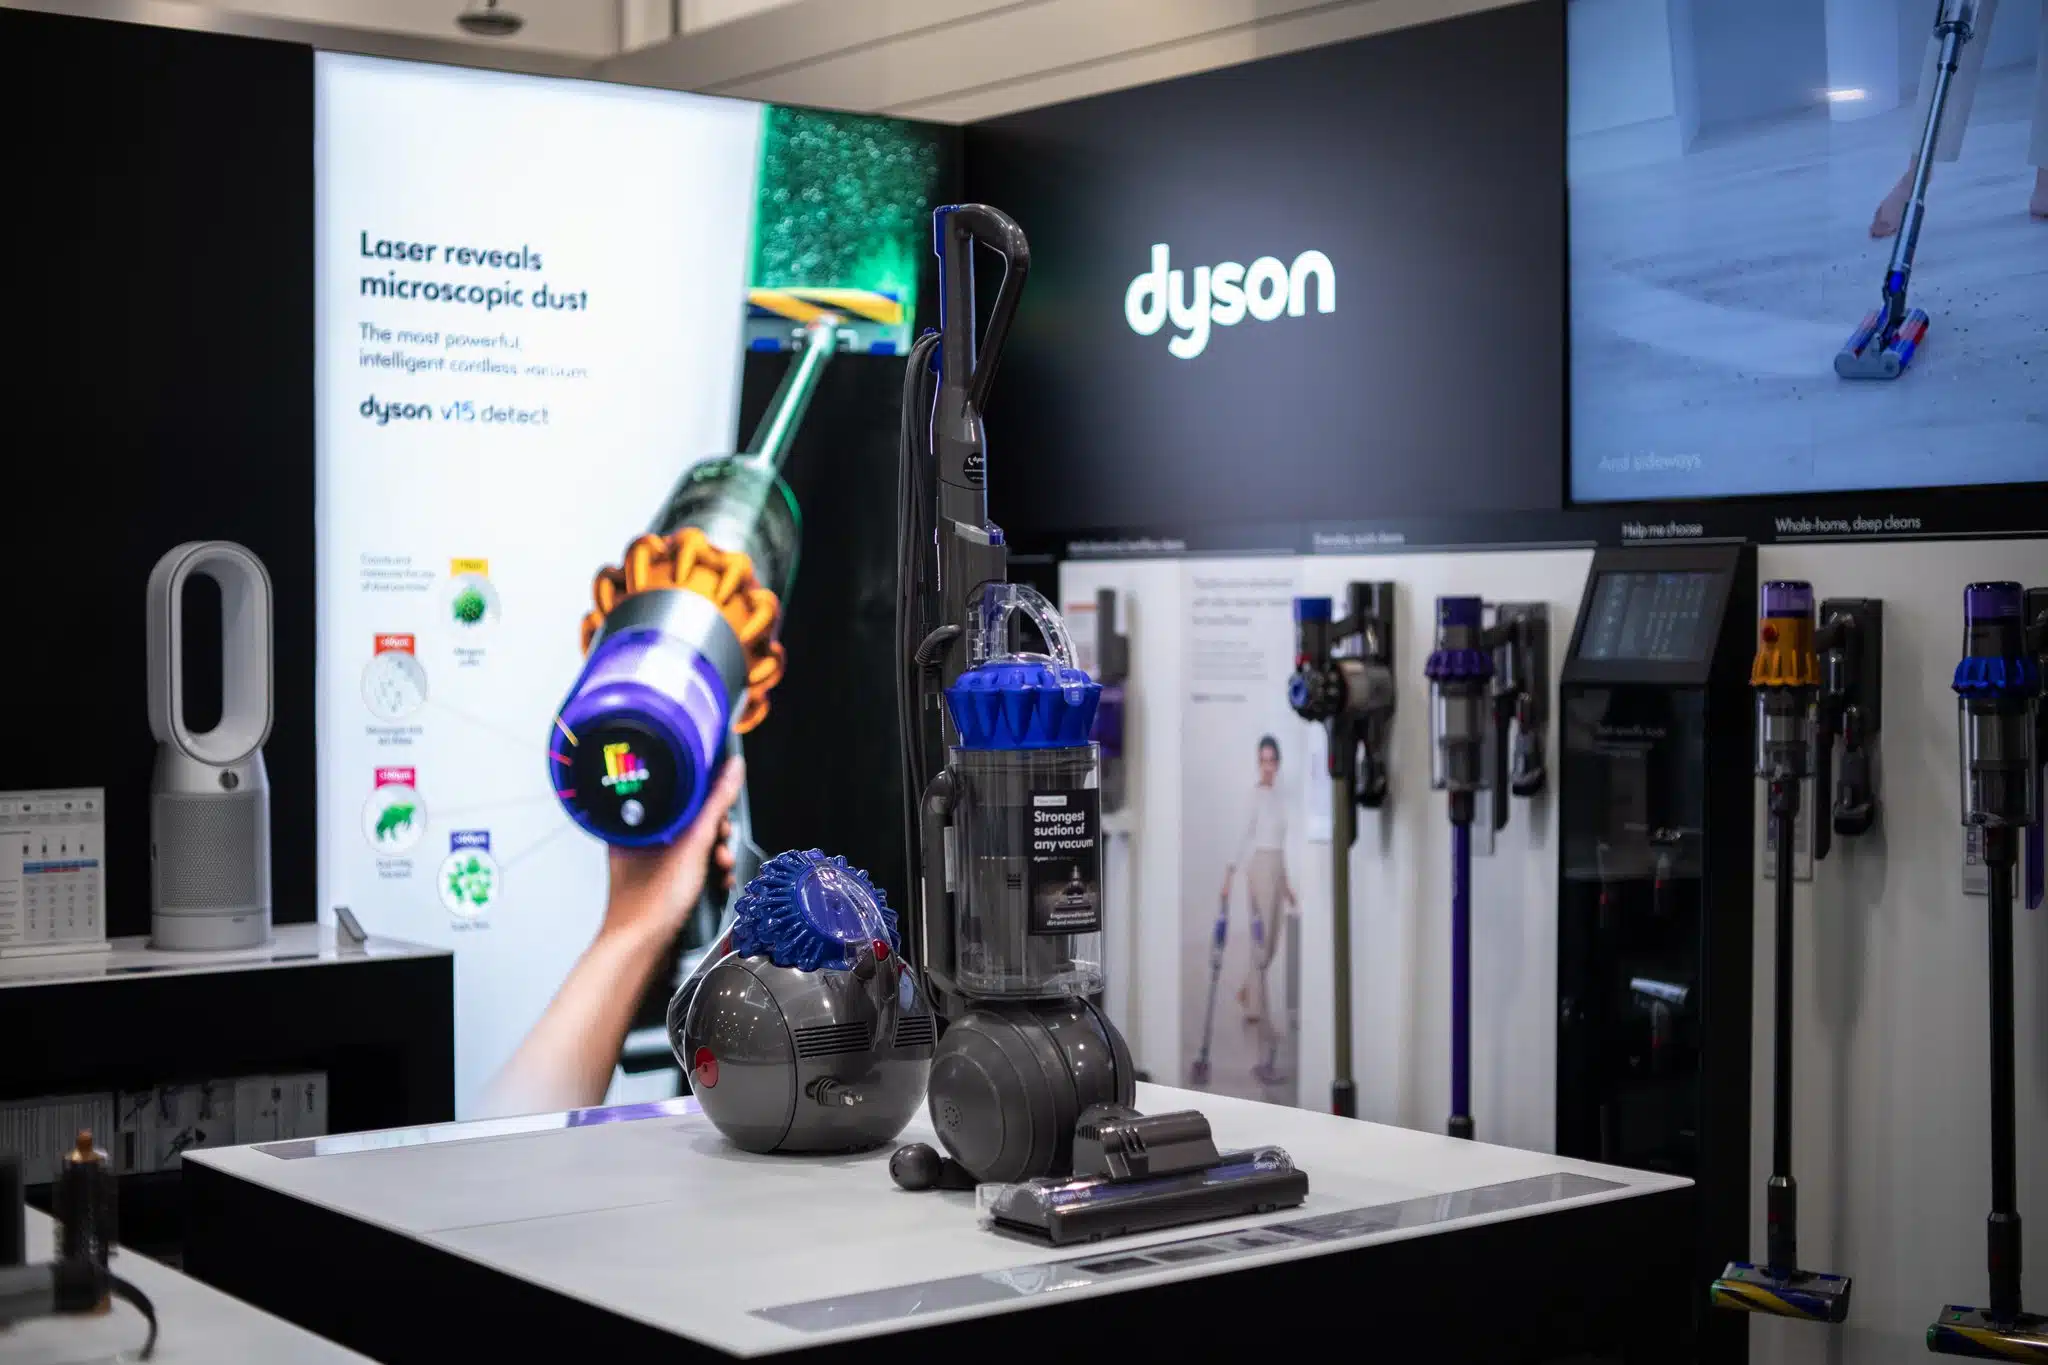 The following is a case study about a photography project we completed for dyson, an innovator in technology for household products. The goal of the project was to capture dyson's sis expansion setup with best buy canada.